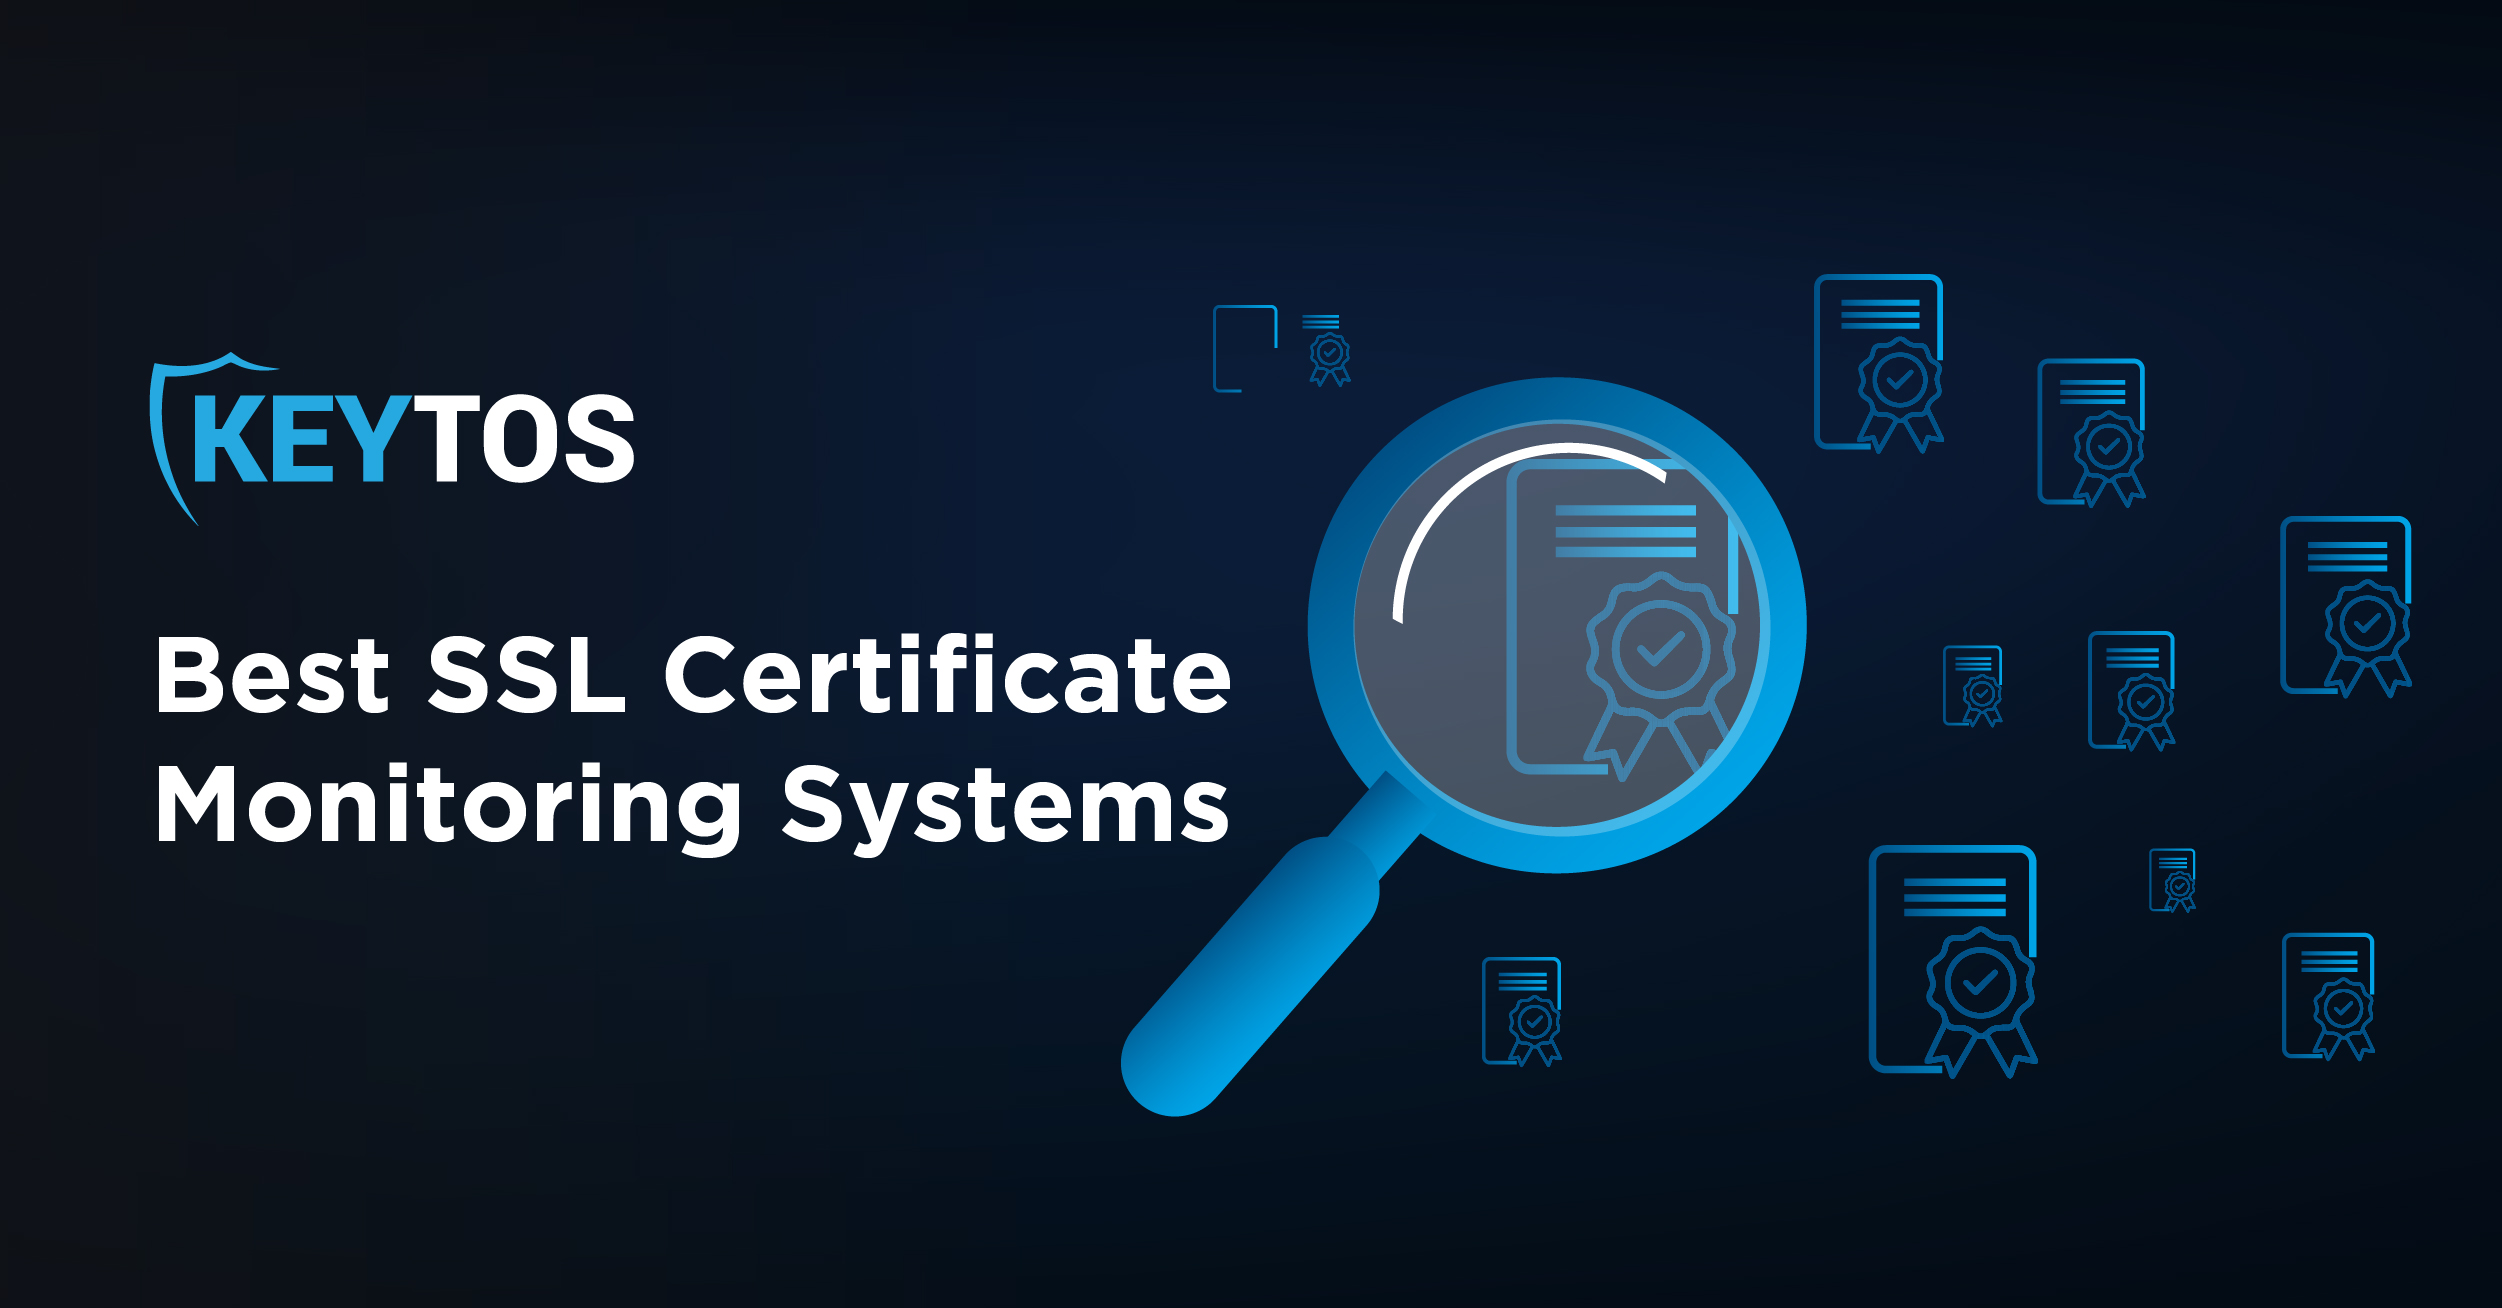 The Best SSL Certificate Monitoring Tools